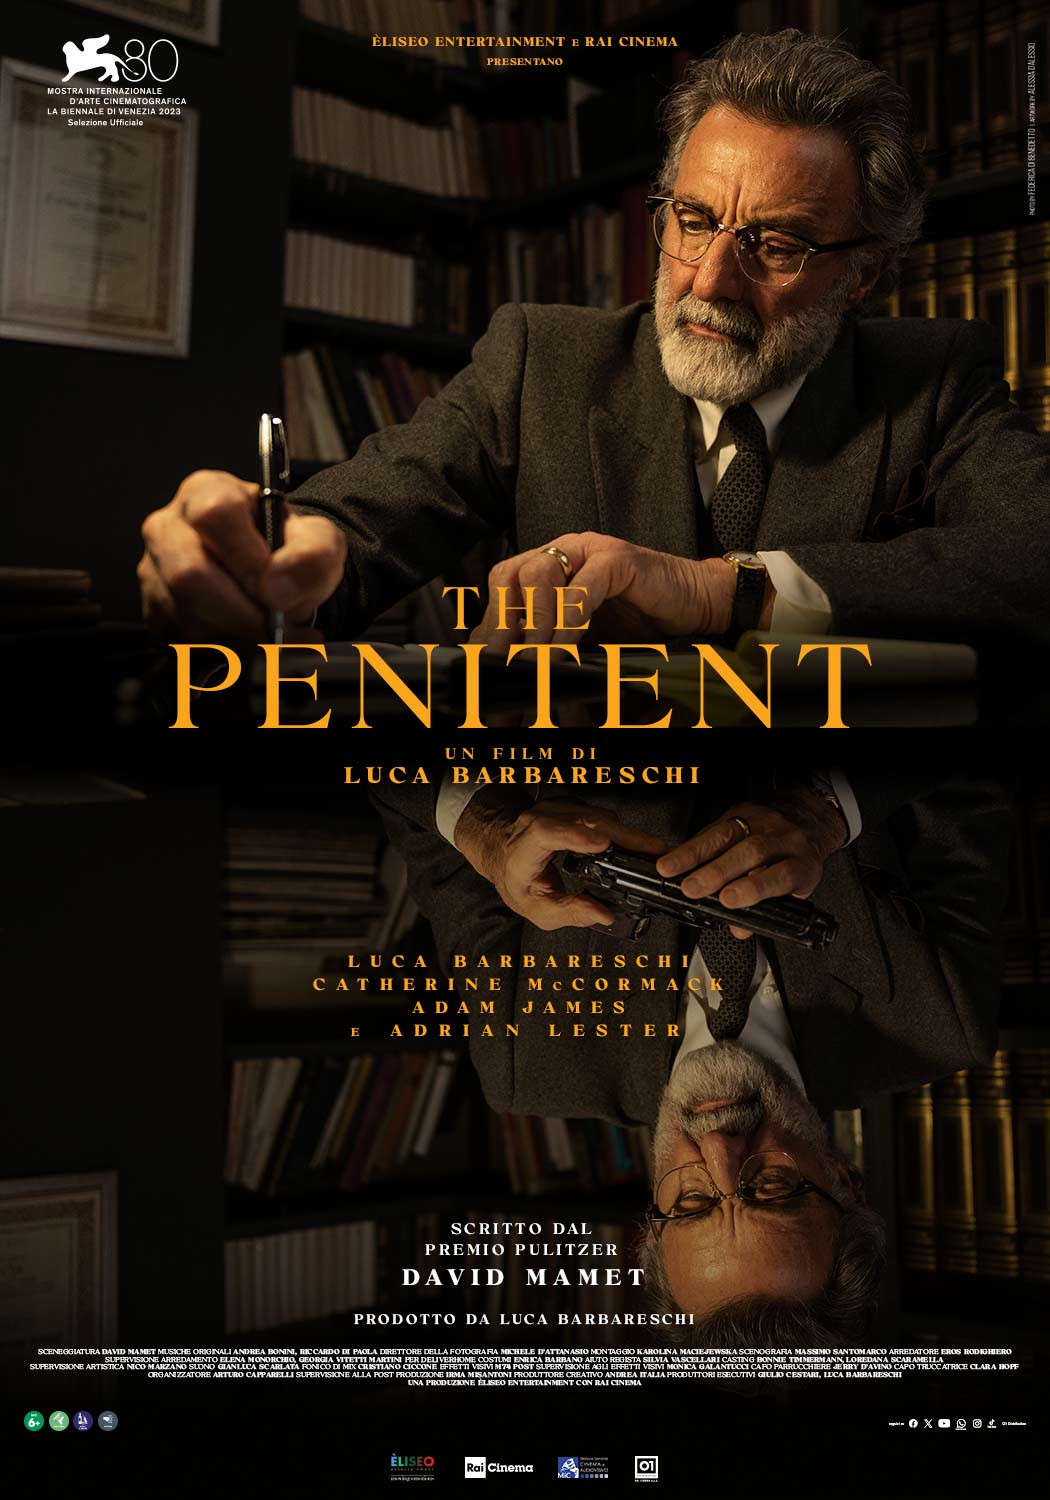 The Penitent – A Rational Man